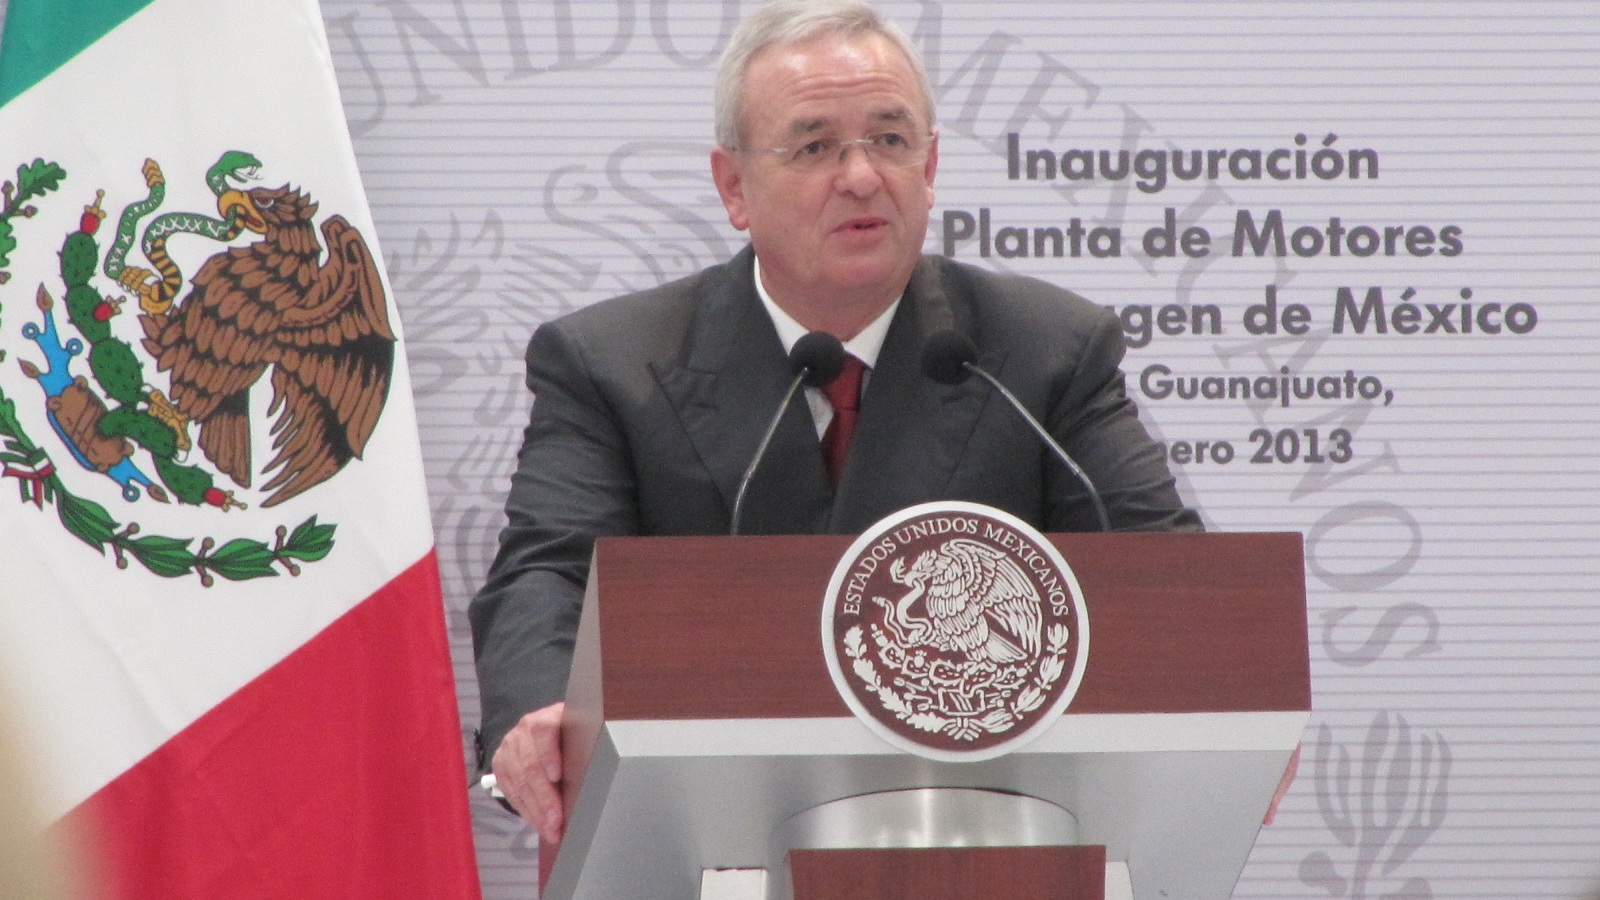 Martin Winterkorn, (now former) CEO of Volkswagen AG, at opening of VW engine plant, Silao, Mexico